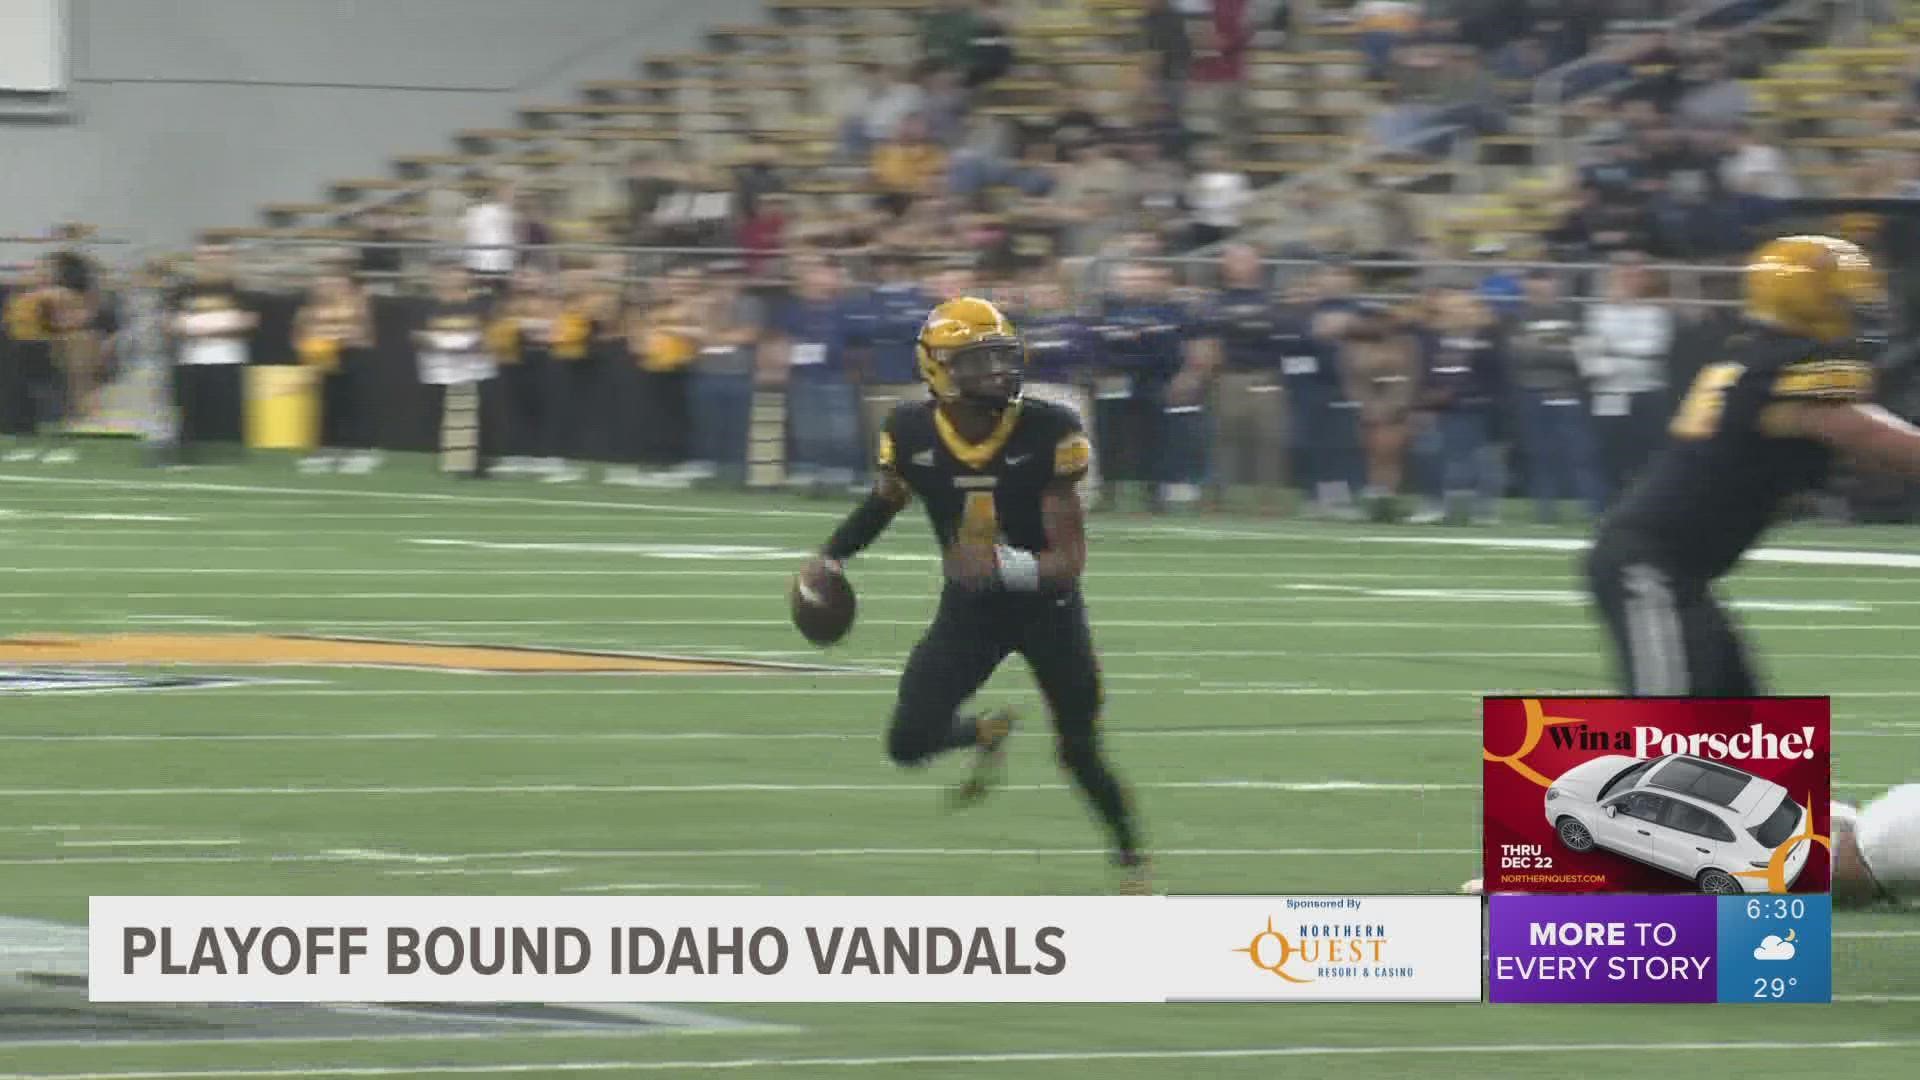 The Vandals will travel to take on Southeastern Louisiana on Saturday in their first round game.